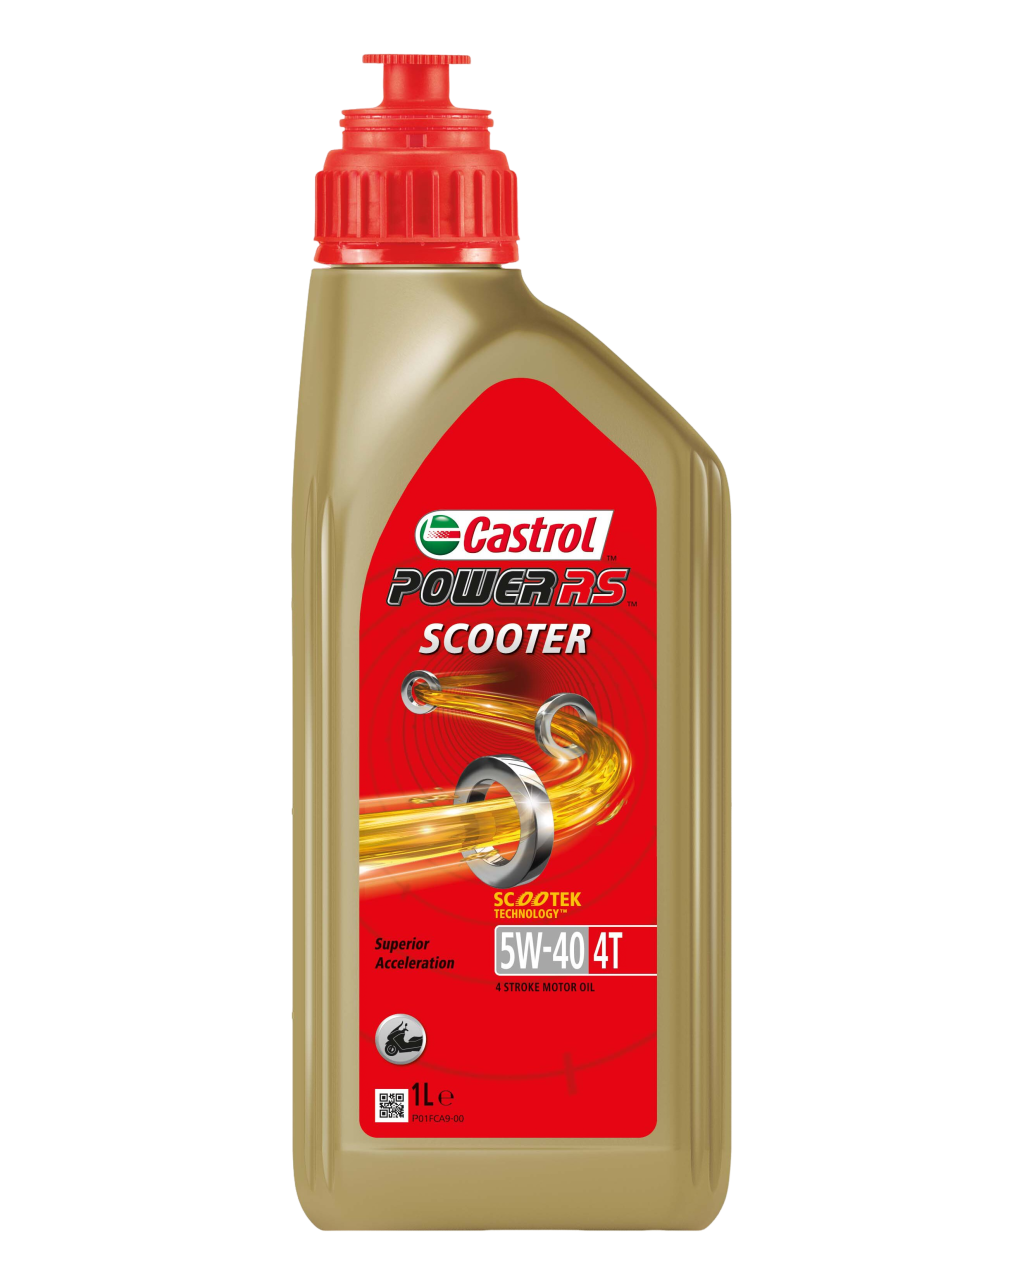 Castrol Power RS Scooter 4T 5W-40, 1 lt